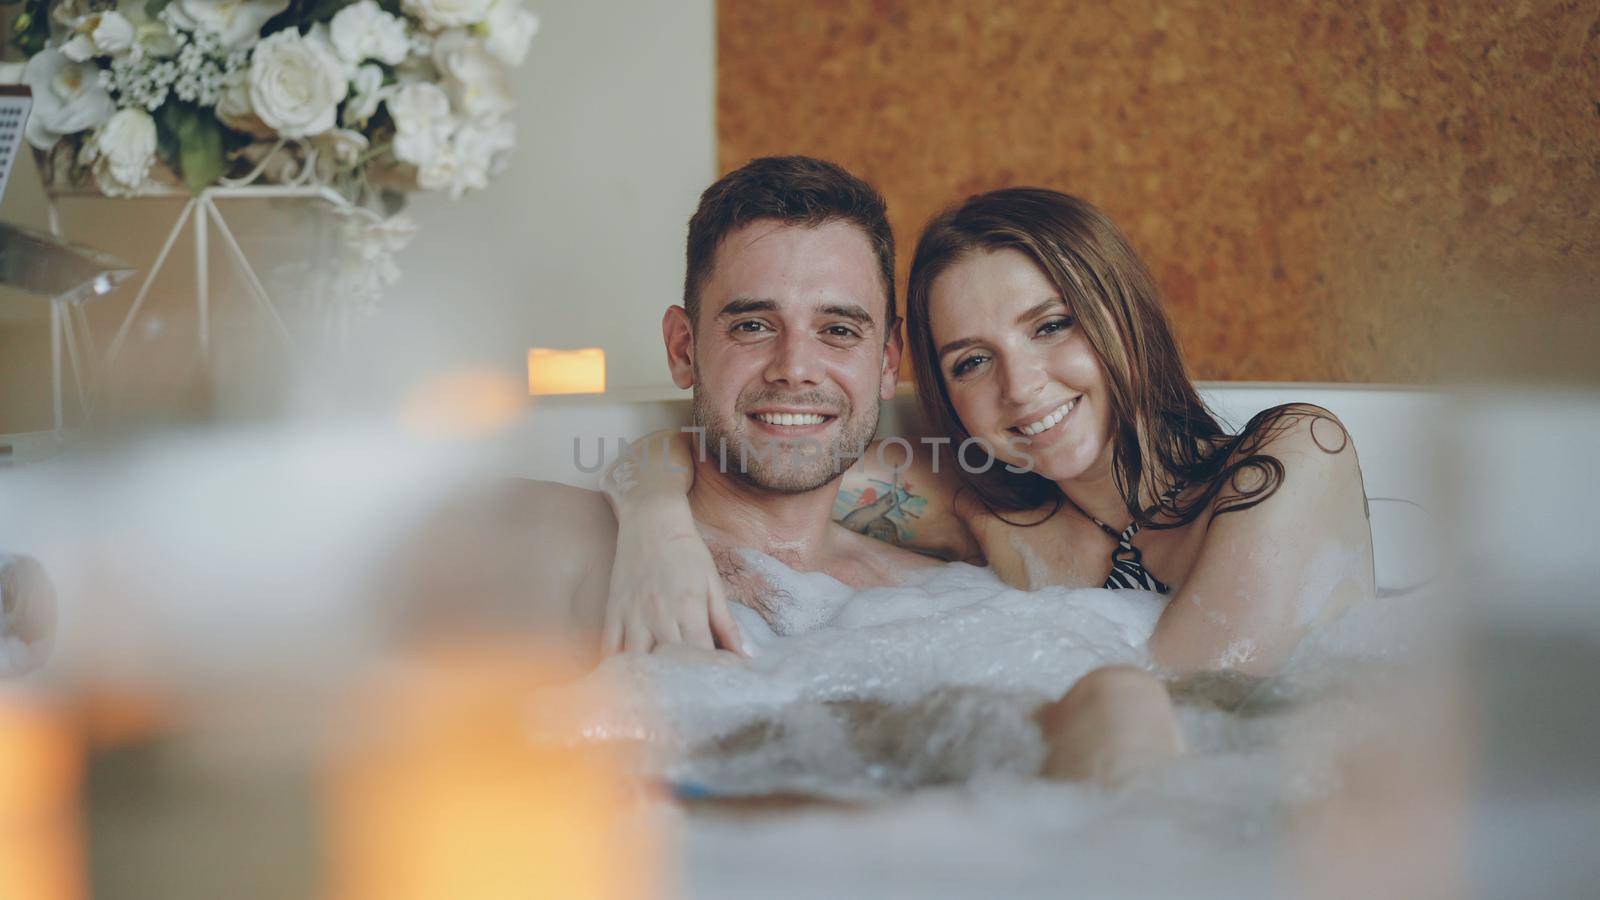 Portrait of good-looking young lovers hugging in jacuzzi, smiling and looking at camera. Burning candles, beautiful flowers and bubbling water with foam is visible.